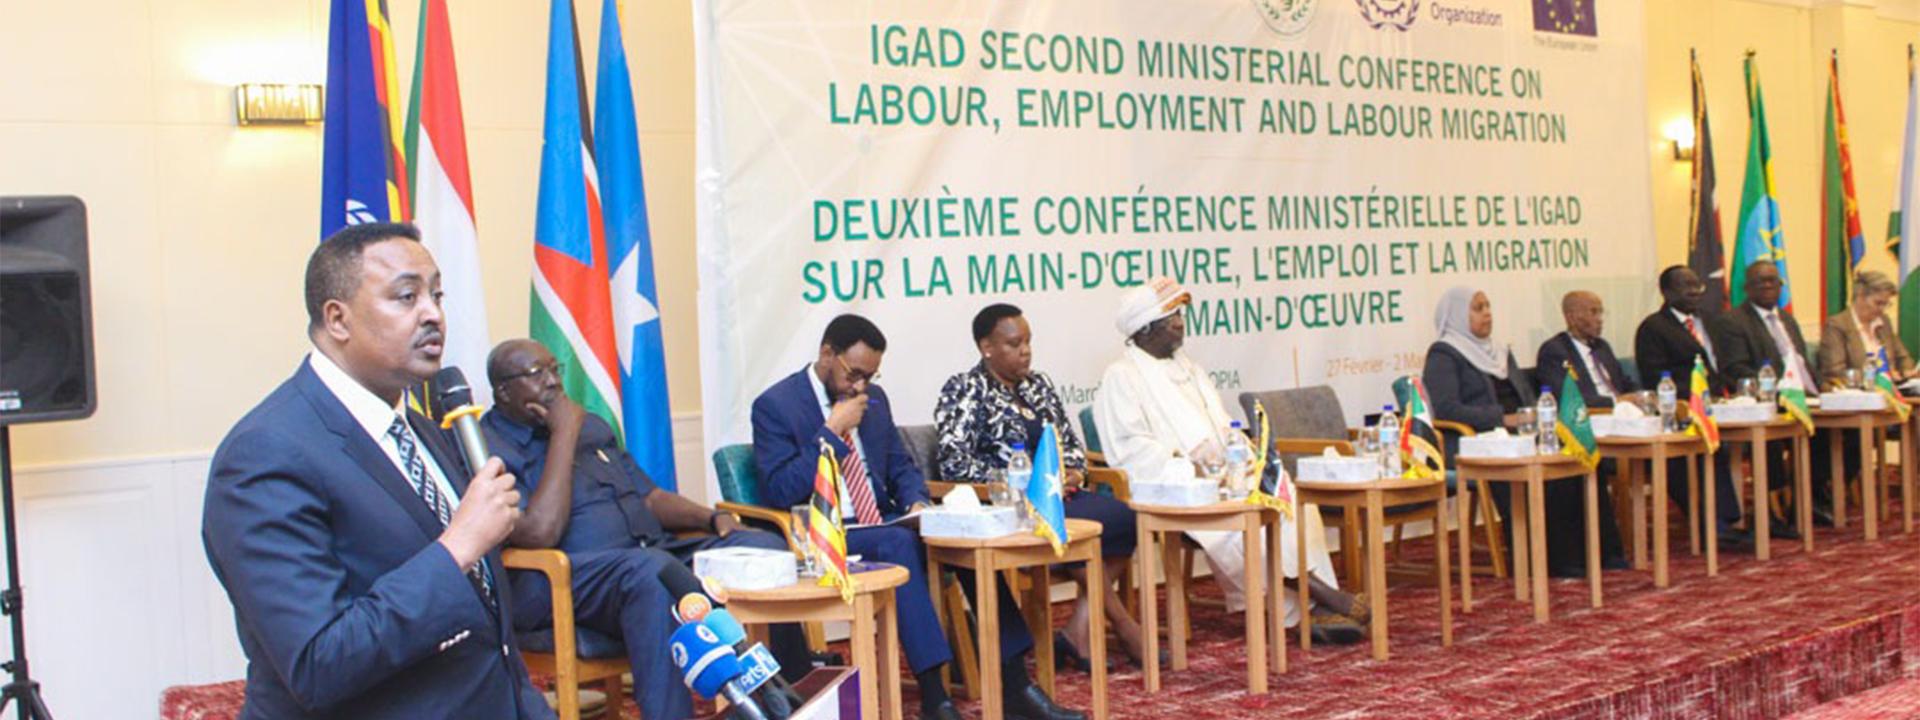 Opening Remarks Workneh Gebeyehu, IGAD Executive Secretary 2nd IGAD Ministerial Conference on Labour, Employment and Labour Migration 2nd March 2023 Addis Ababa, Federal Democratic Republic of Ethiopia